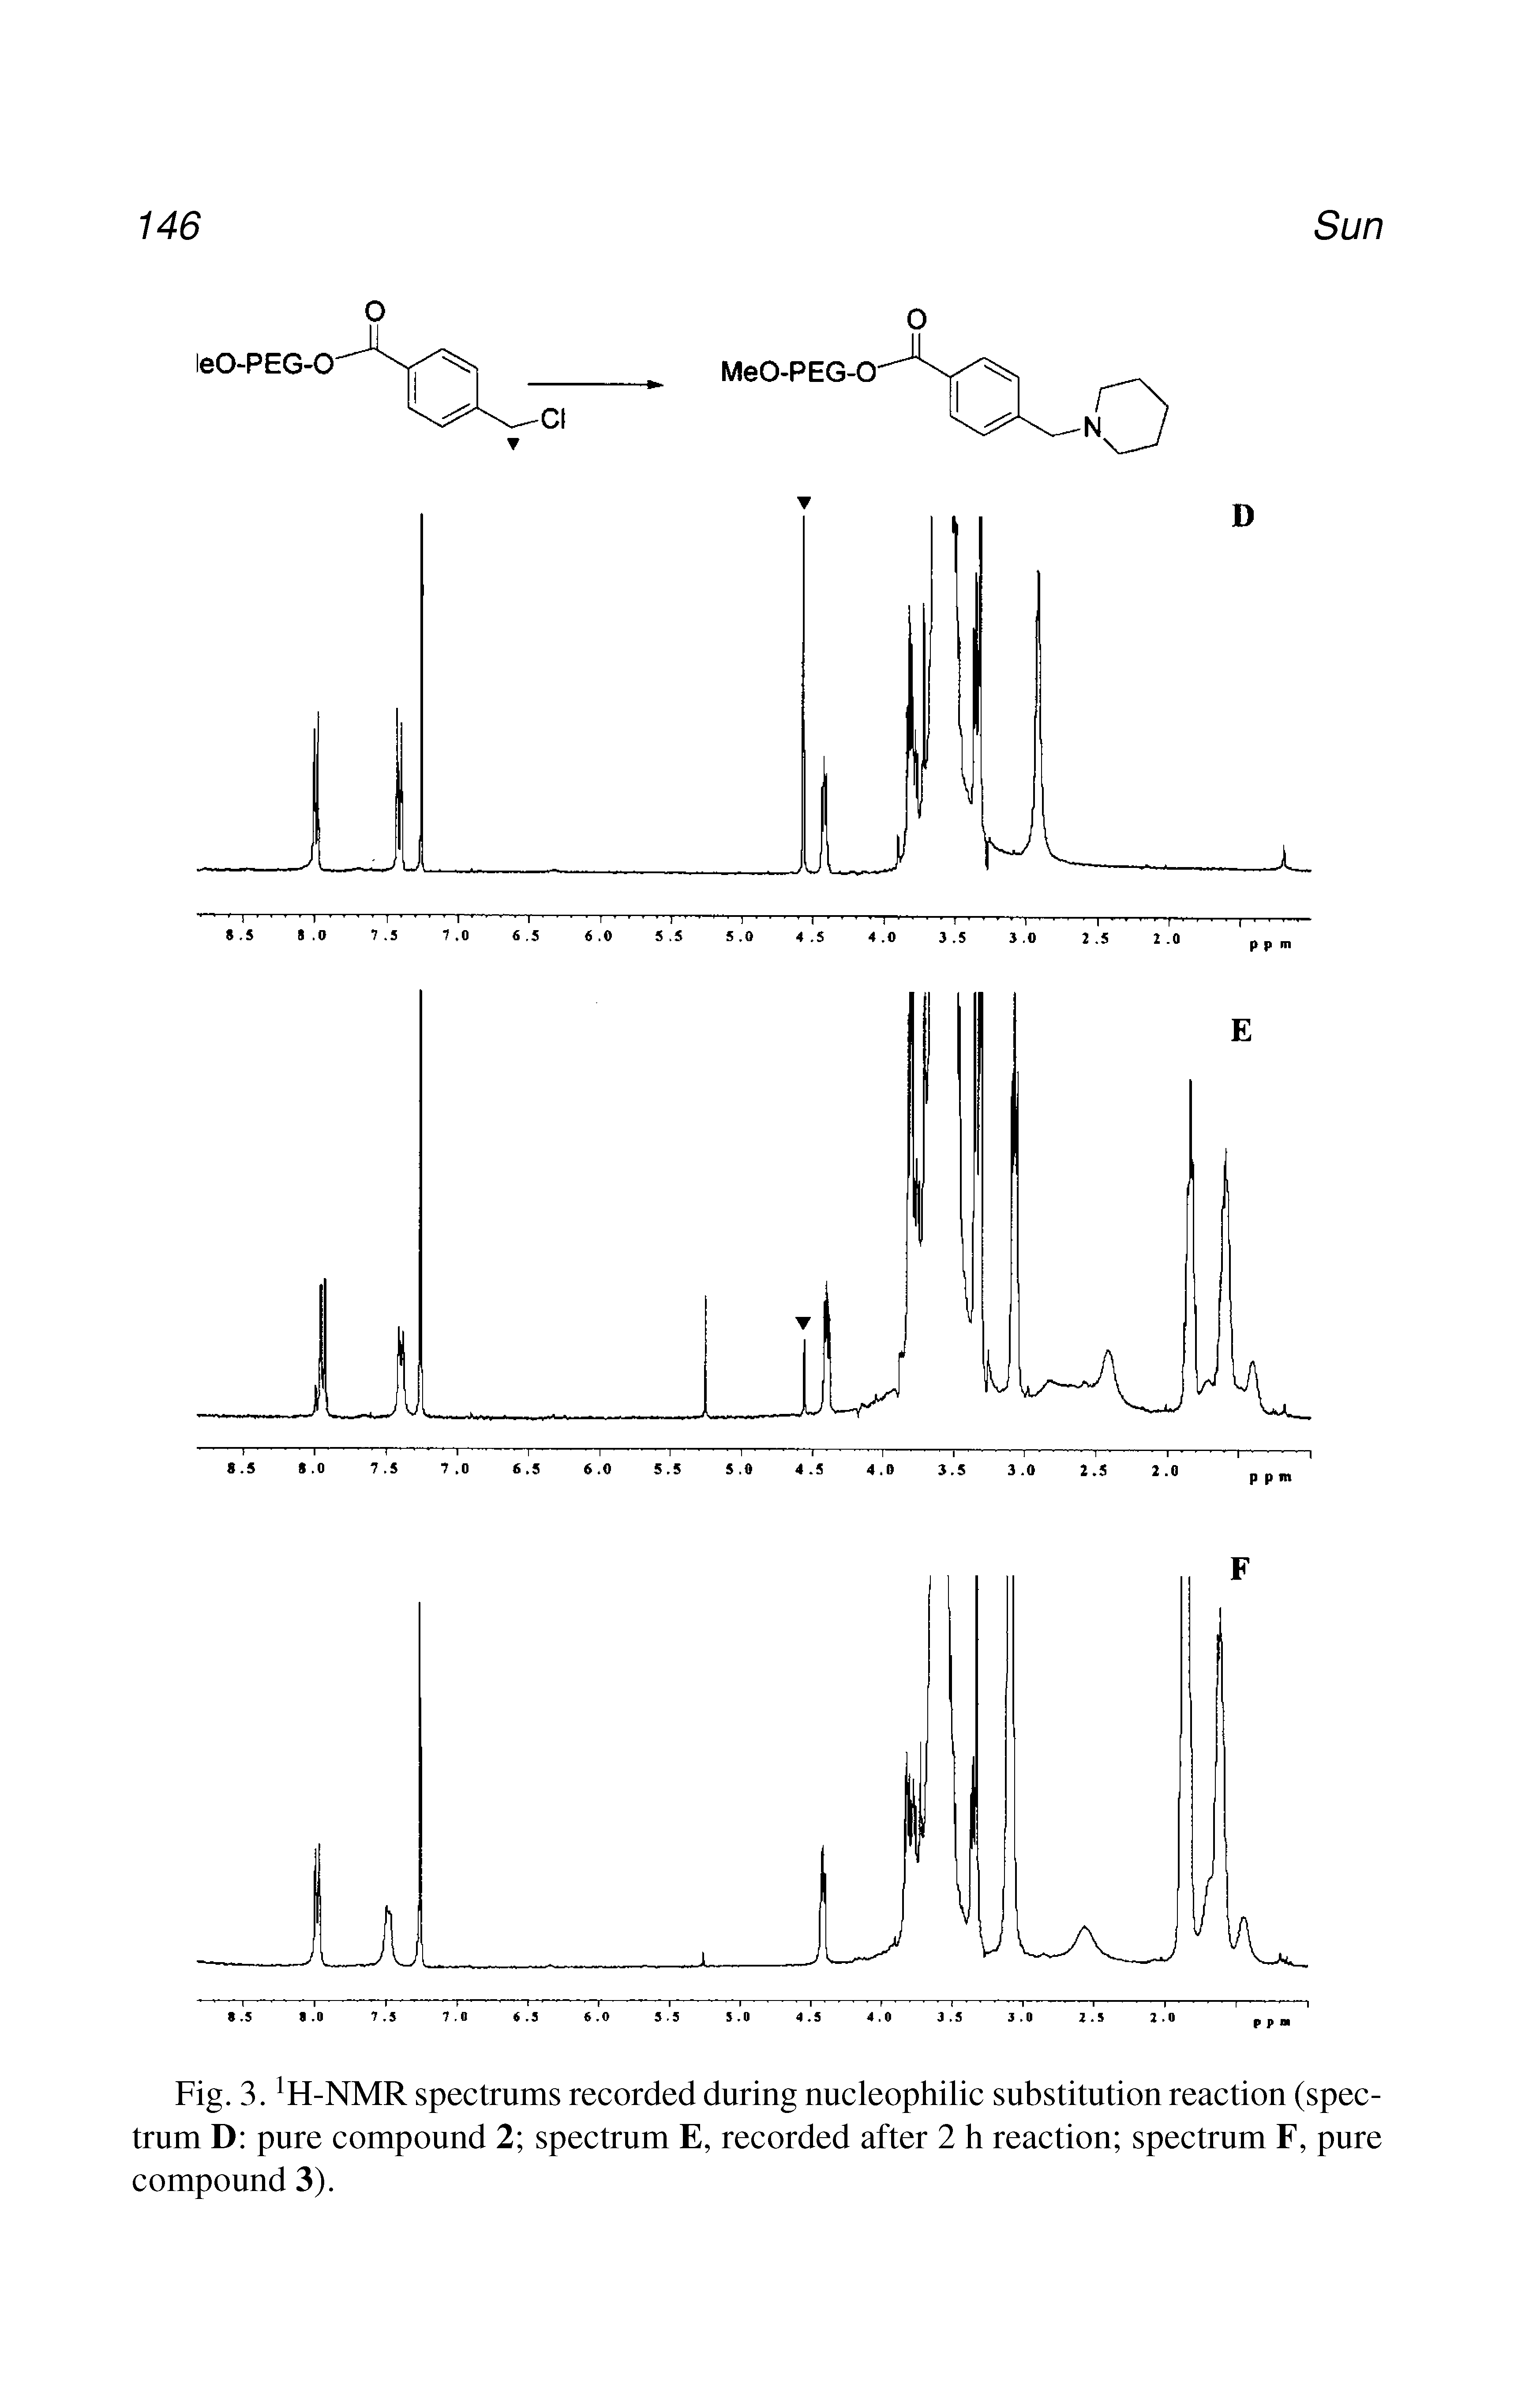 Fig. 3. H-NMR spectrums recorded during nucleophilic substitution reaction (spectrum D pure compound 2 spectrum E, recorded after 2 h reaction spectrum F, pure compound 3).